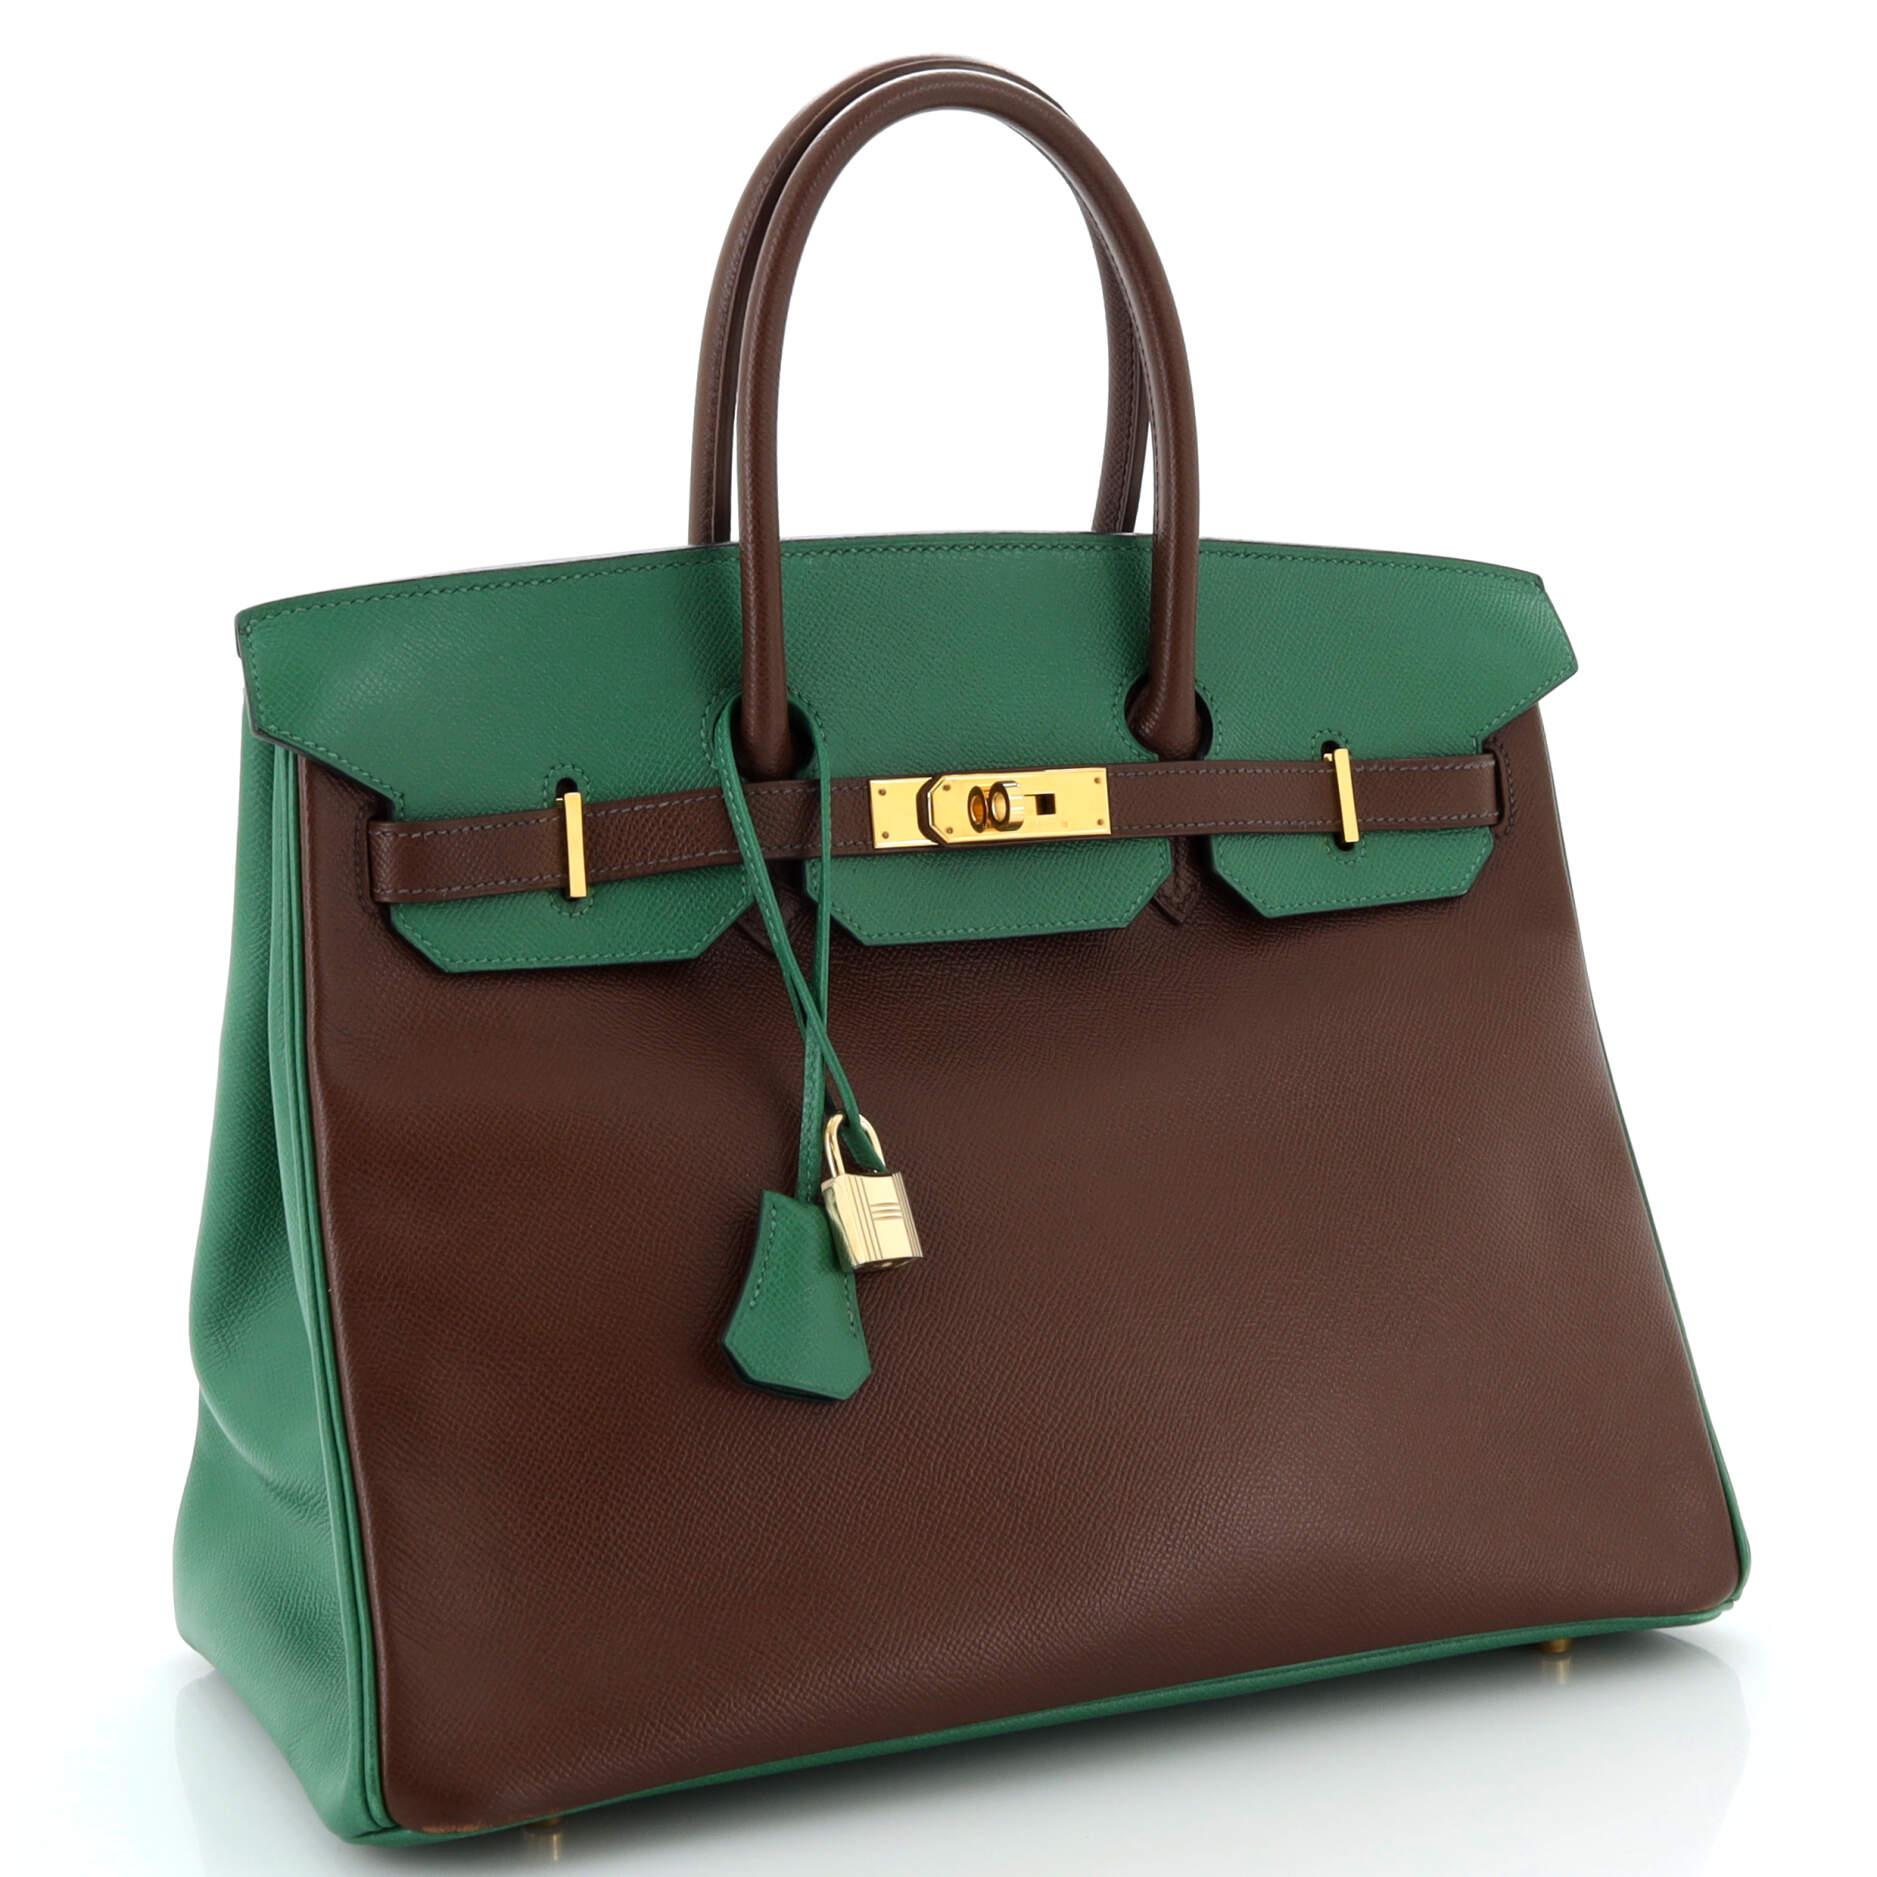 Hermes Birkin Handbag Bicolor Courchevel with Gold Hardware 35 In Fair Condition For Sale In NY, NY